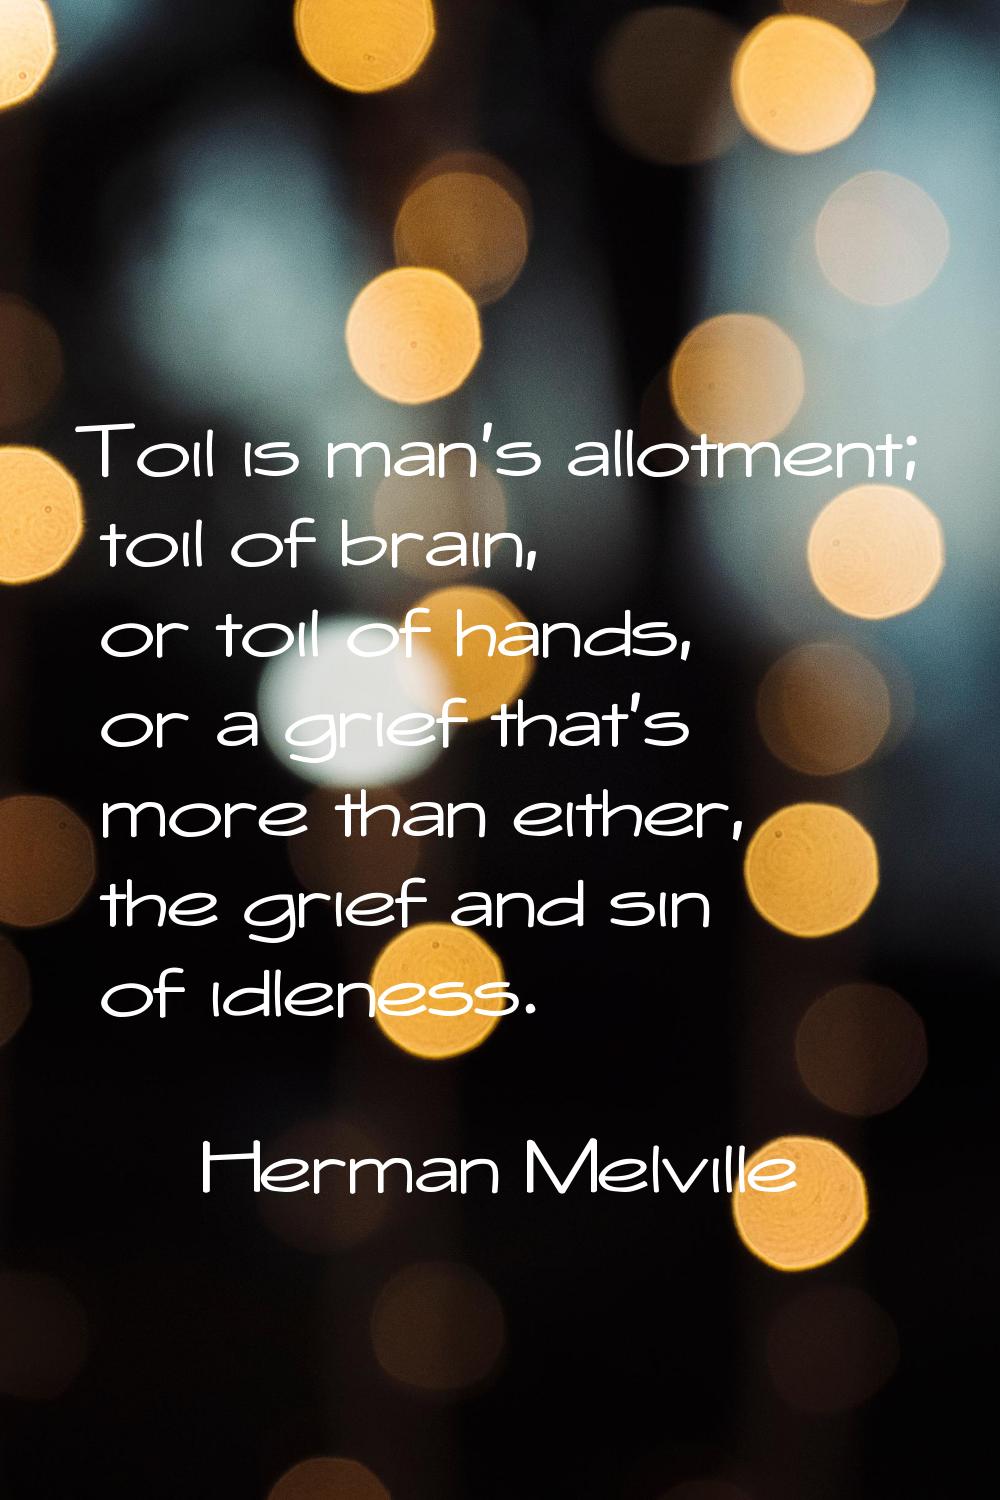 Toil is man's allotment; toil of brain, or toil of hands, or a grief that's more than either, the g